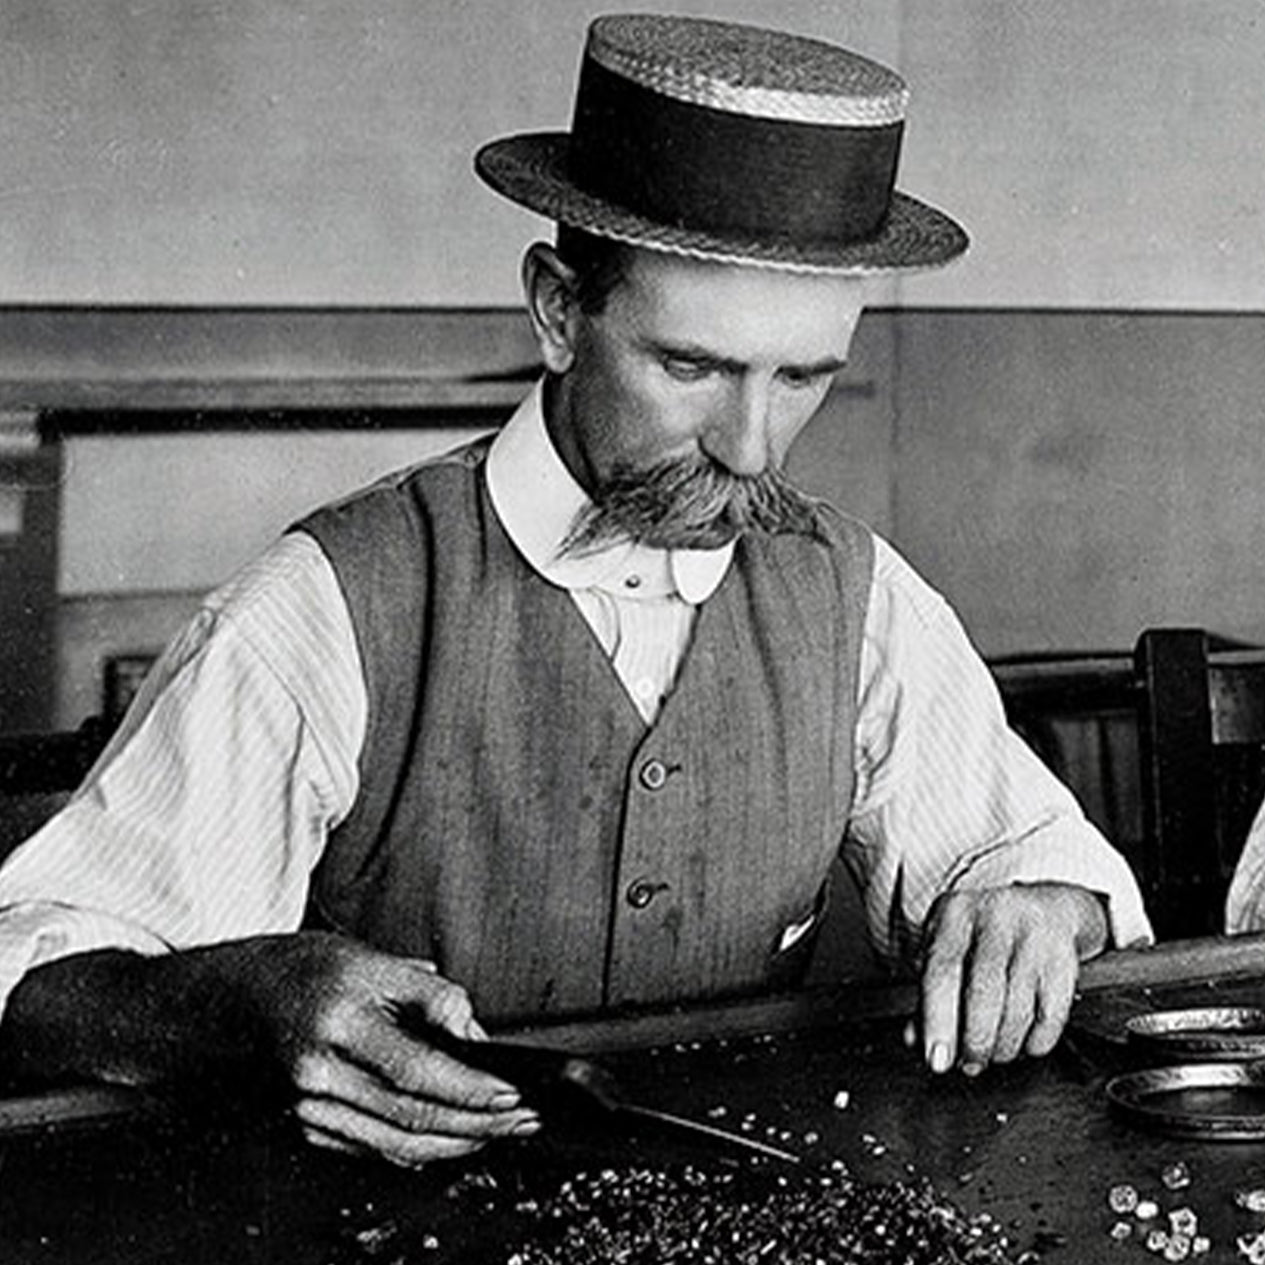 Historical image of a man inspecting and sorting rough diamonds at the Kimberly Mine